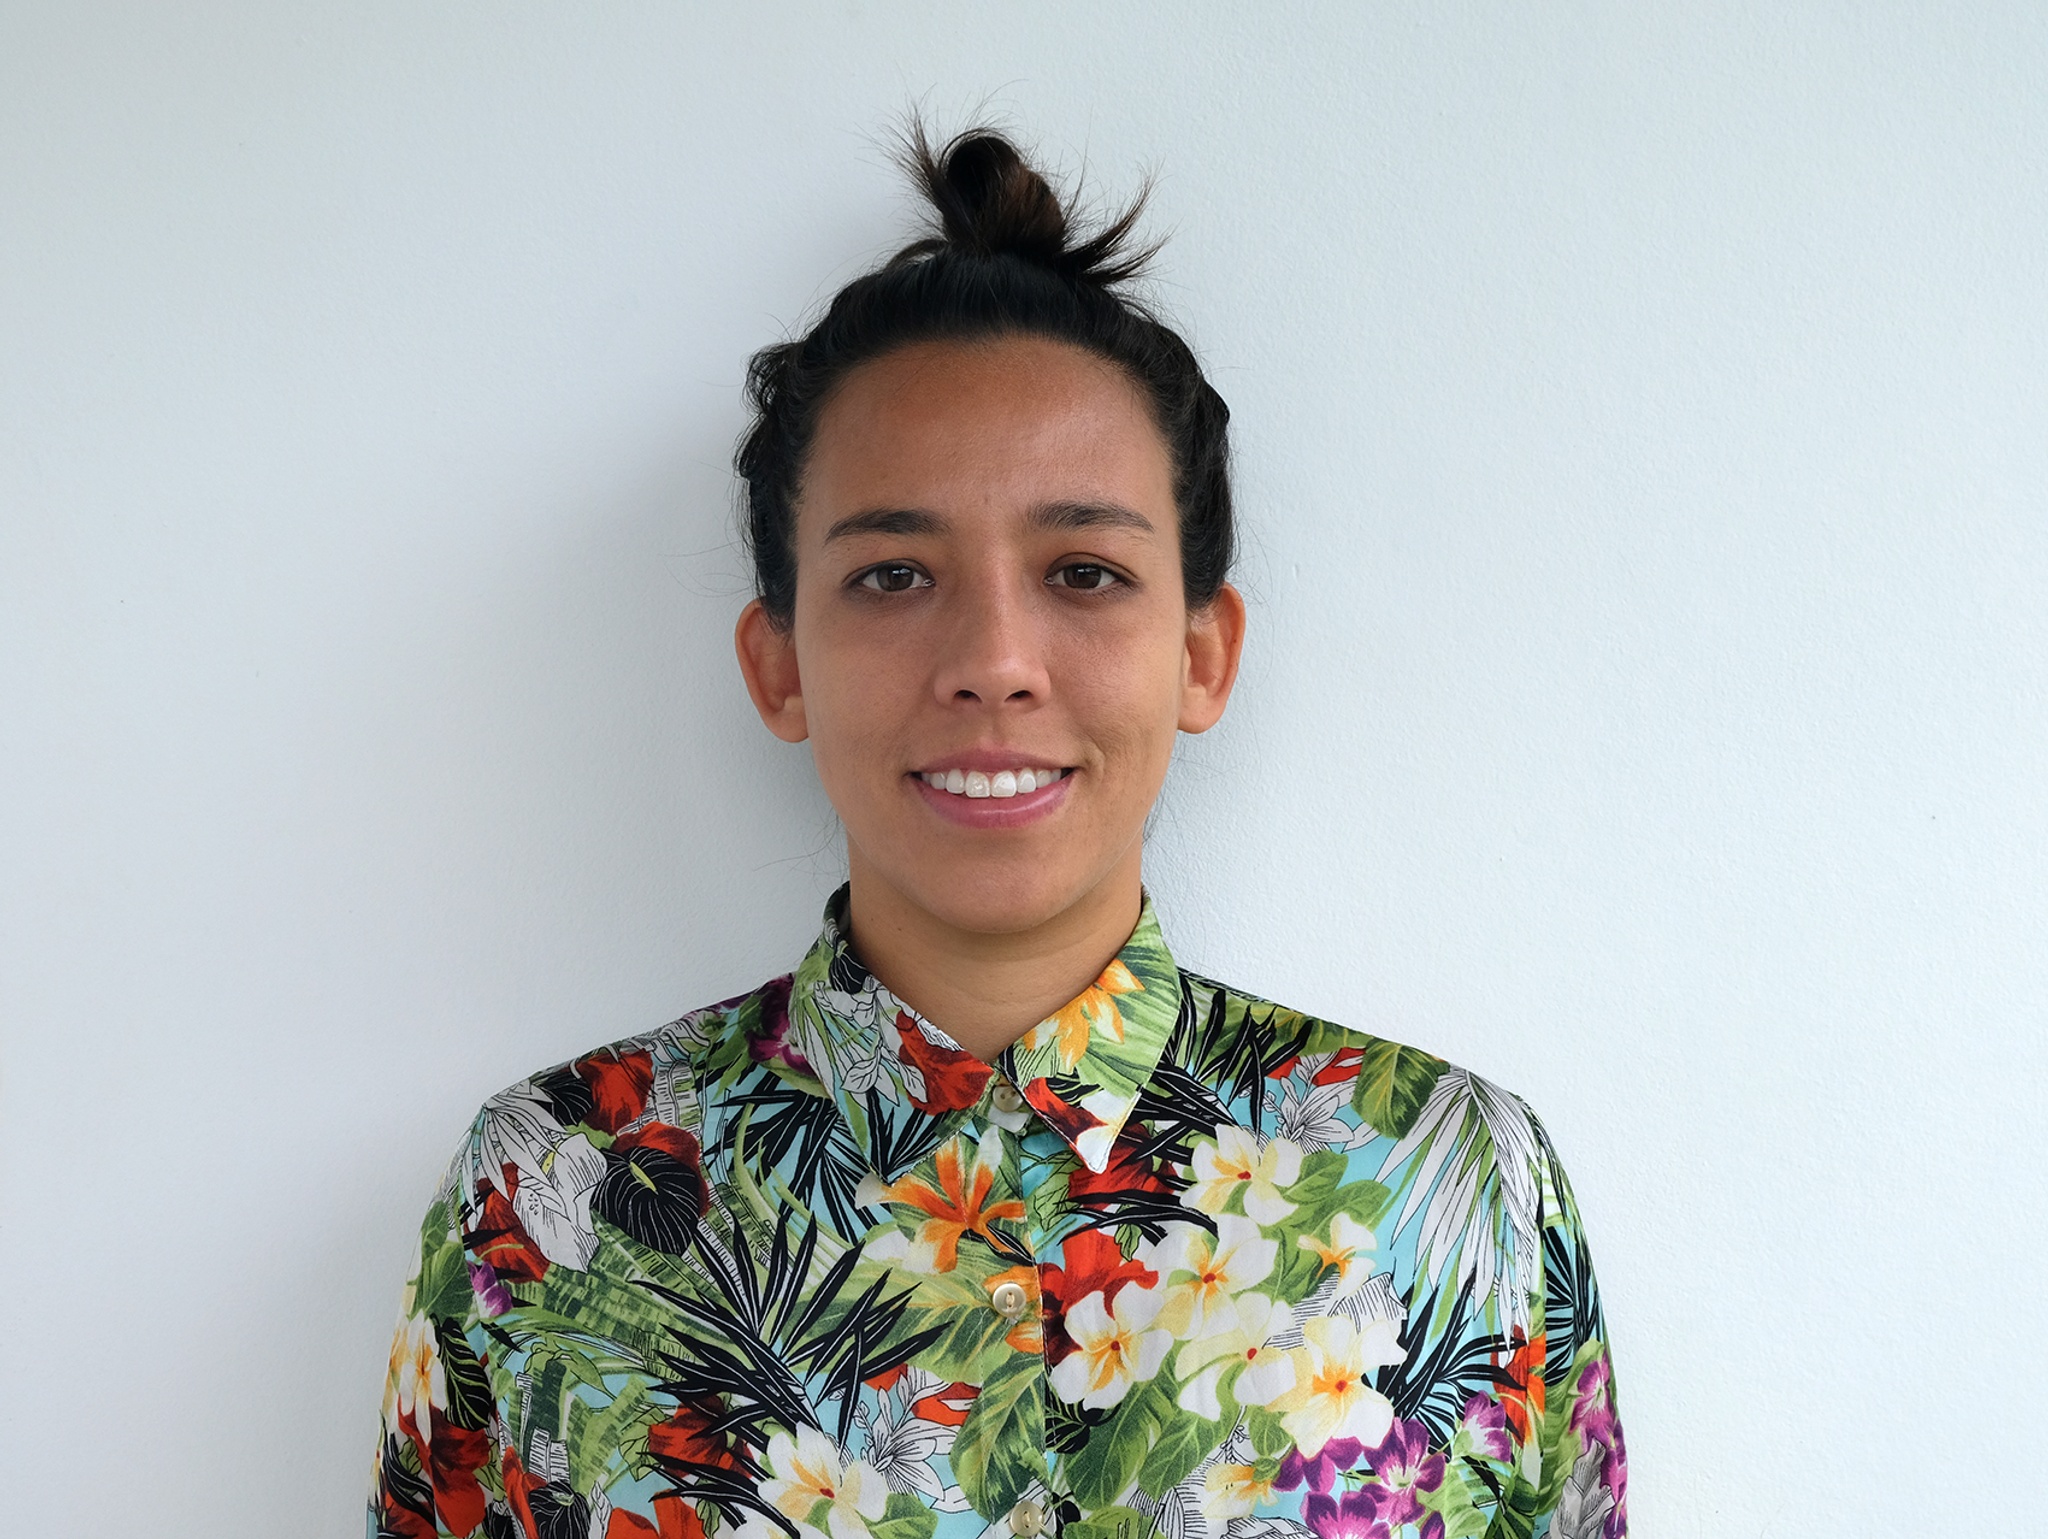 A portrait of curator Valentina Tong shown from the shoulders up against a blank, white wall. Valentina has dark hair pulled back into a loose bun at the top of her head. She smiles, looking straight ahead, and wears a colorful floral-print button down shirt buttoned to the collar.